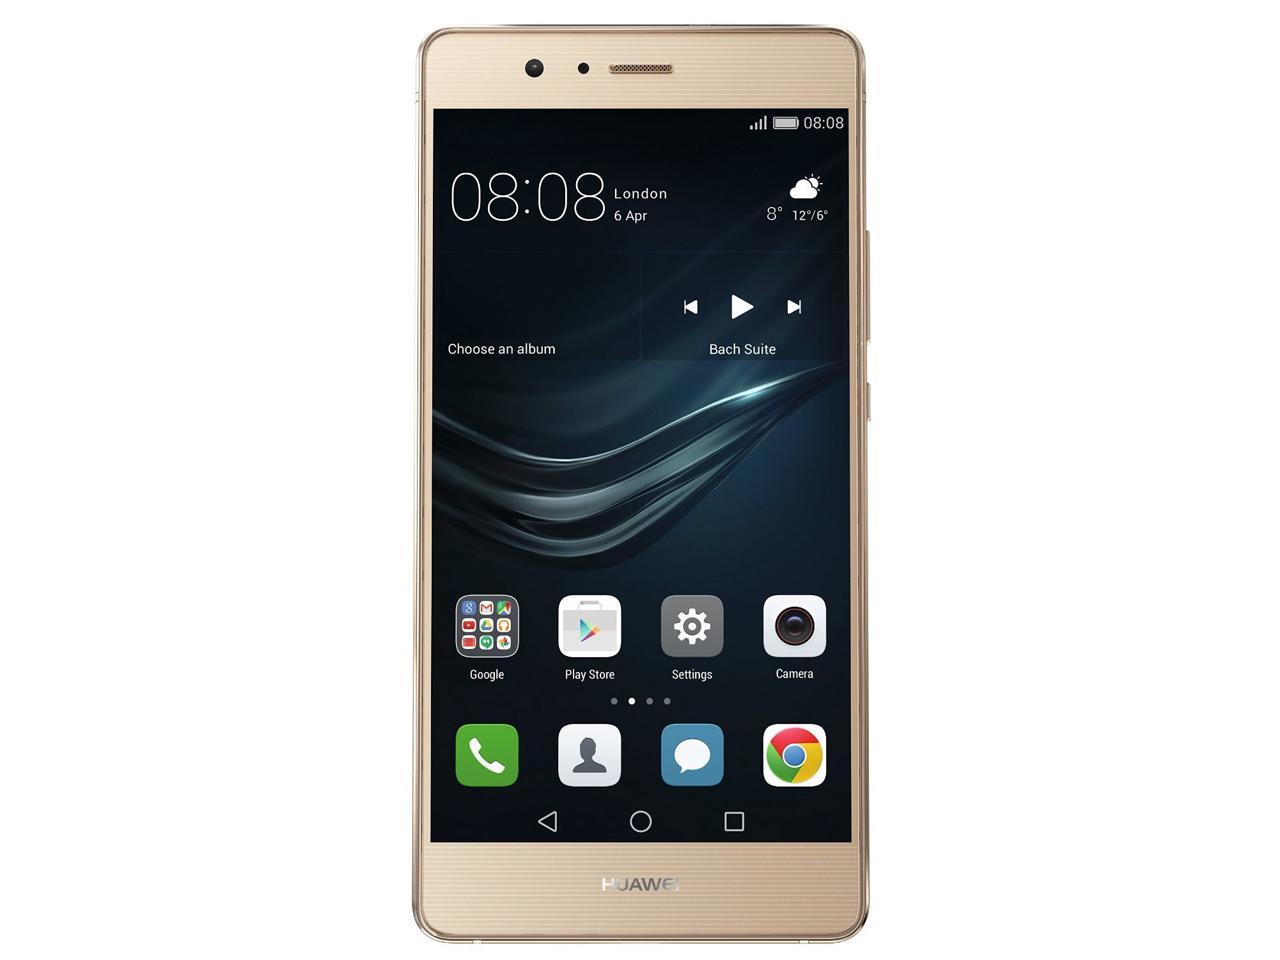 Huawei P9 lite 16GB VNS-L22 GSM Unlocked Android SmartPhone